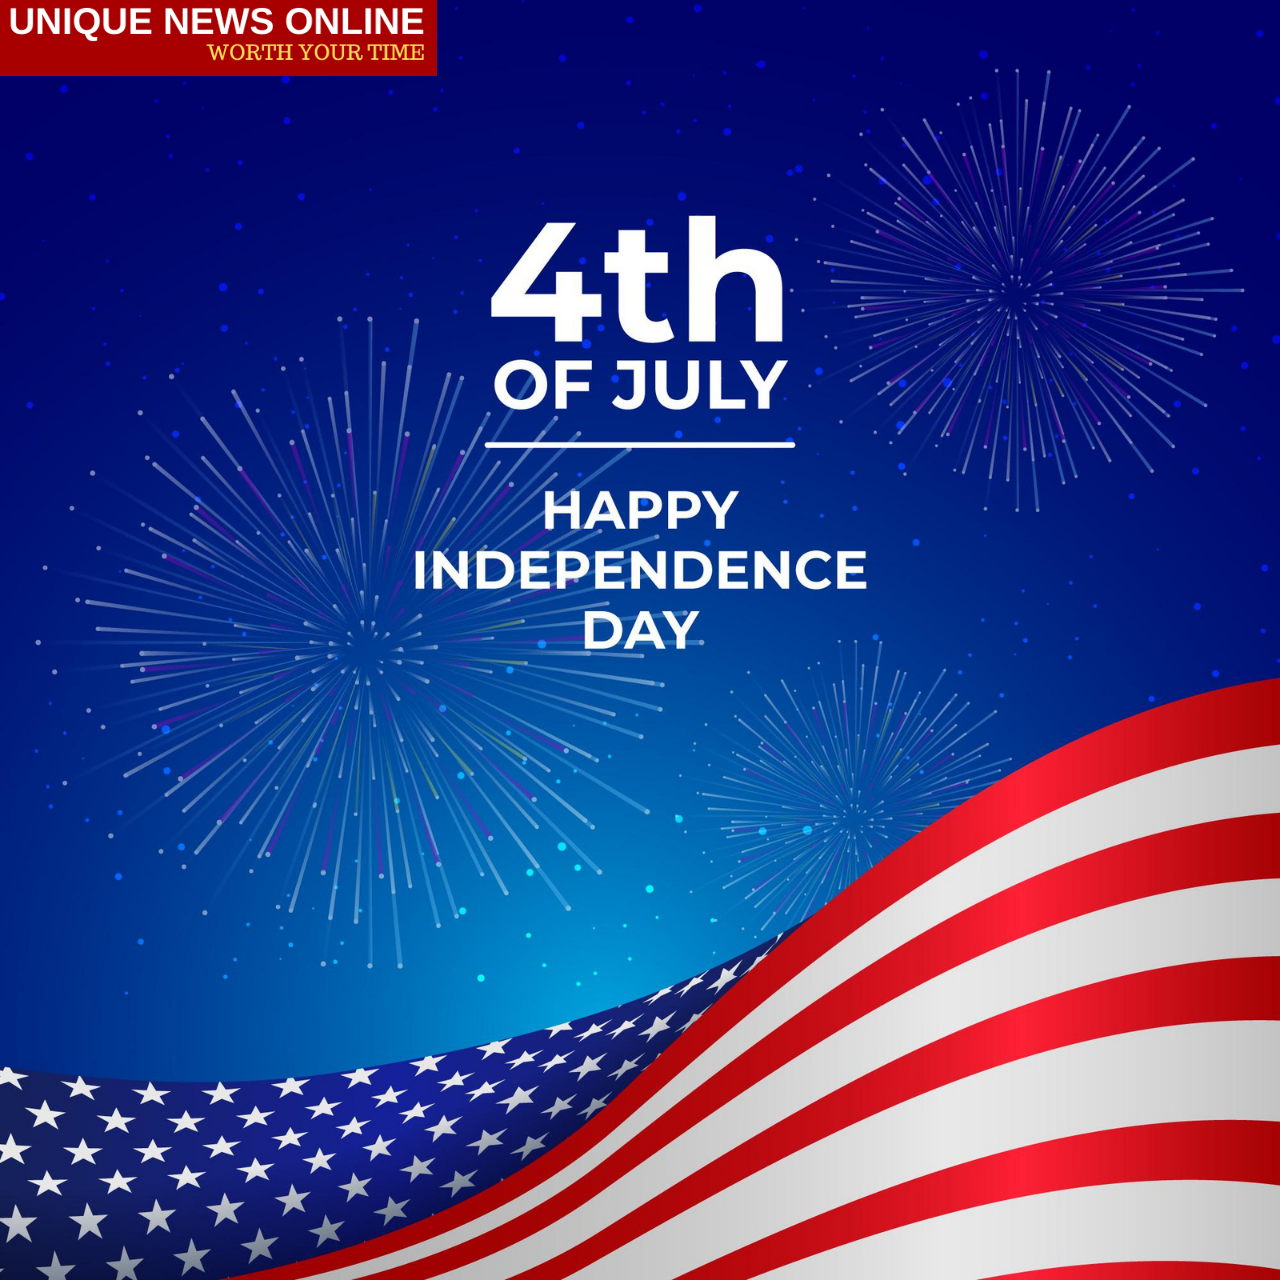 American Independence Day 2021: Quotes, Wishes, Messages, Status, HD Images, and Greetings for USA Independence Day